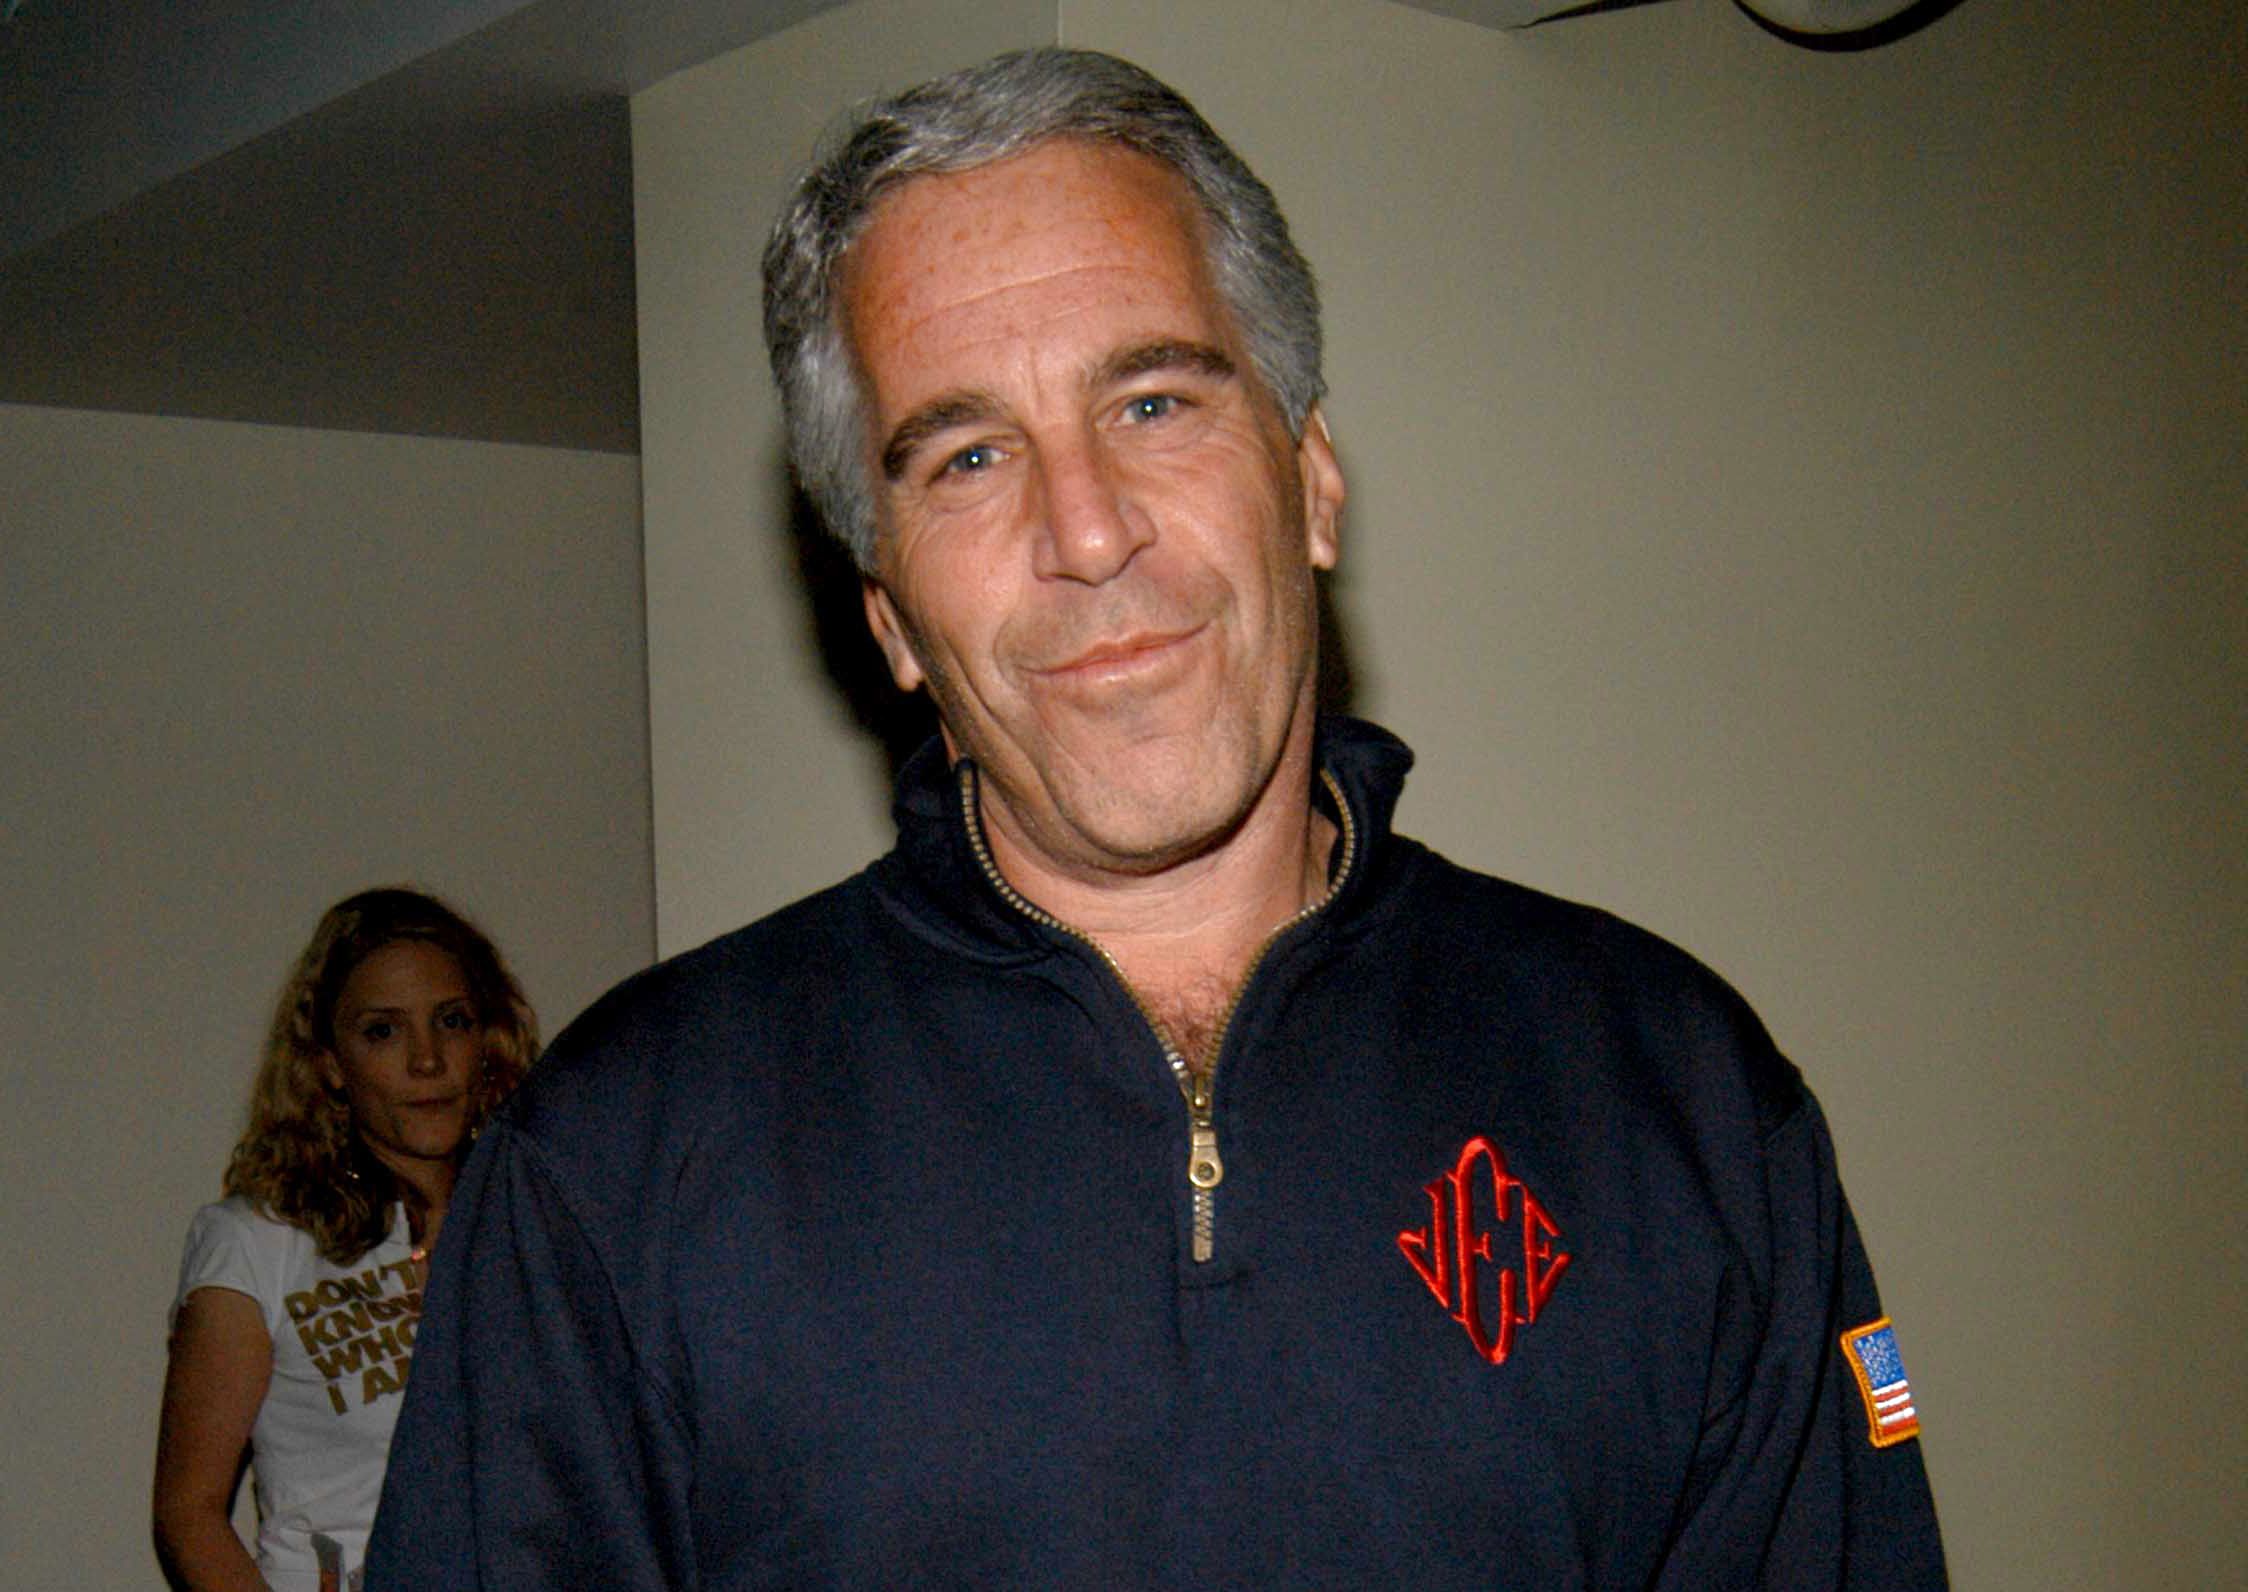 Epstein donated $46 million to Les Wexner's private foundation in 2008